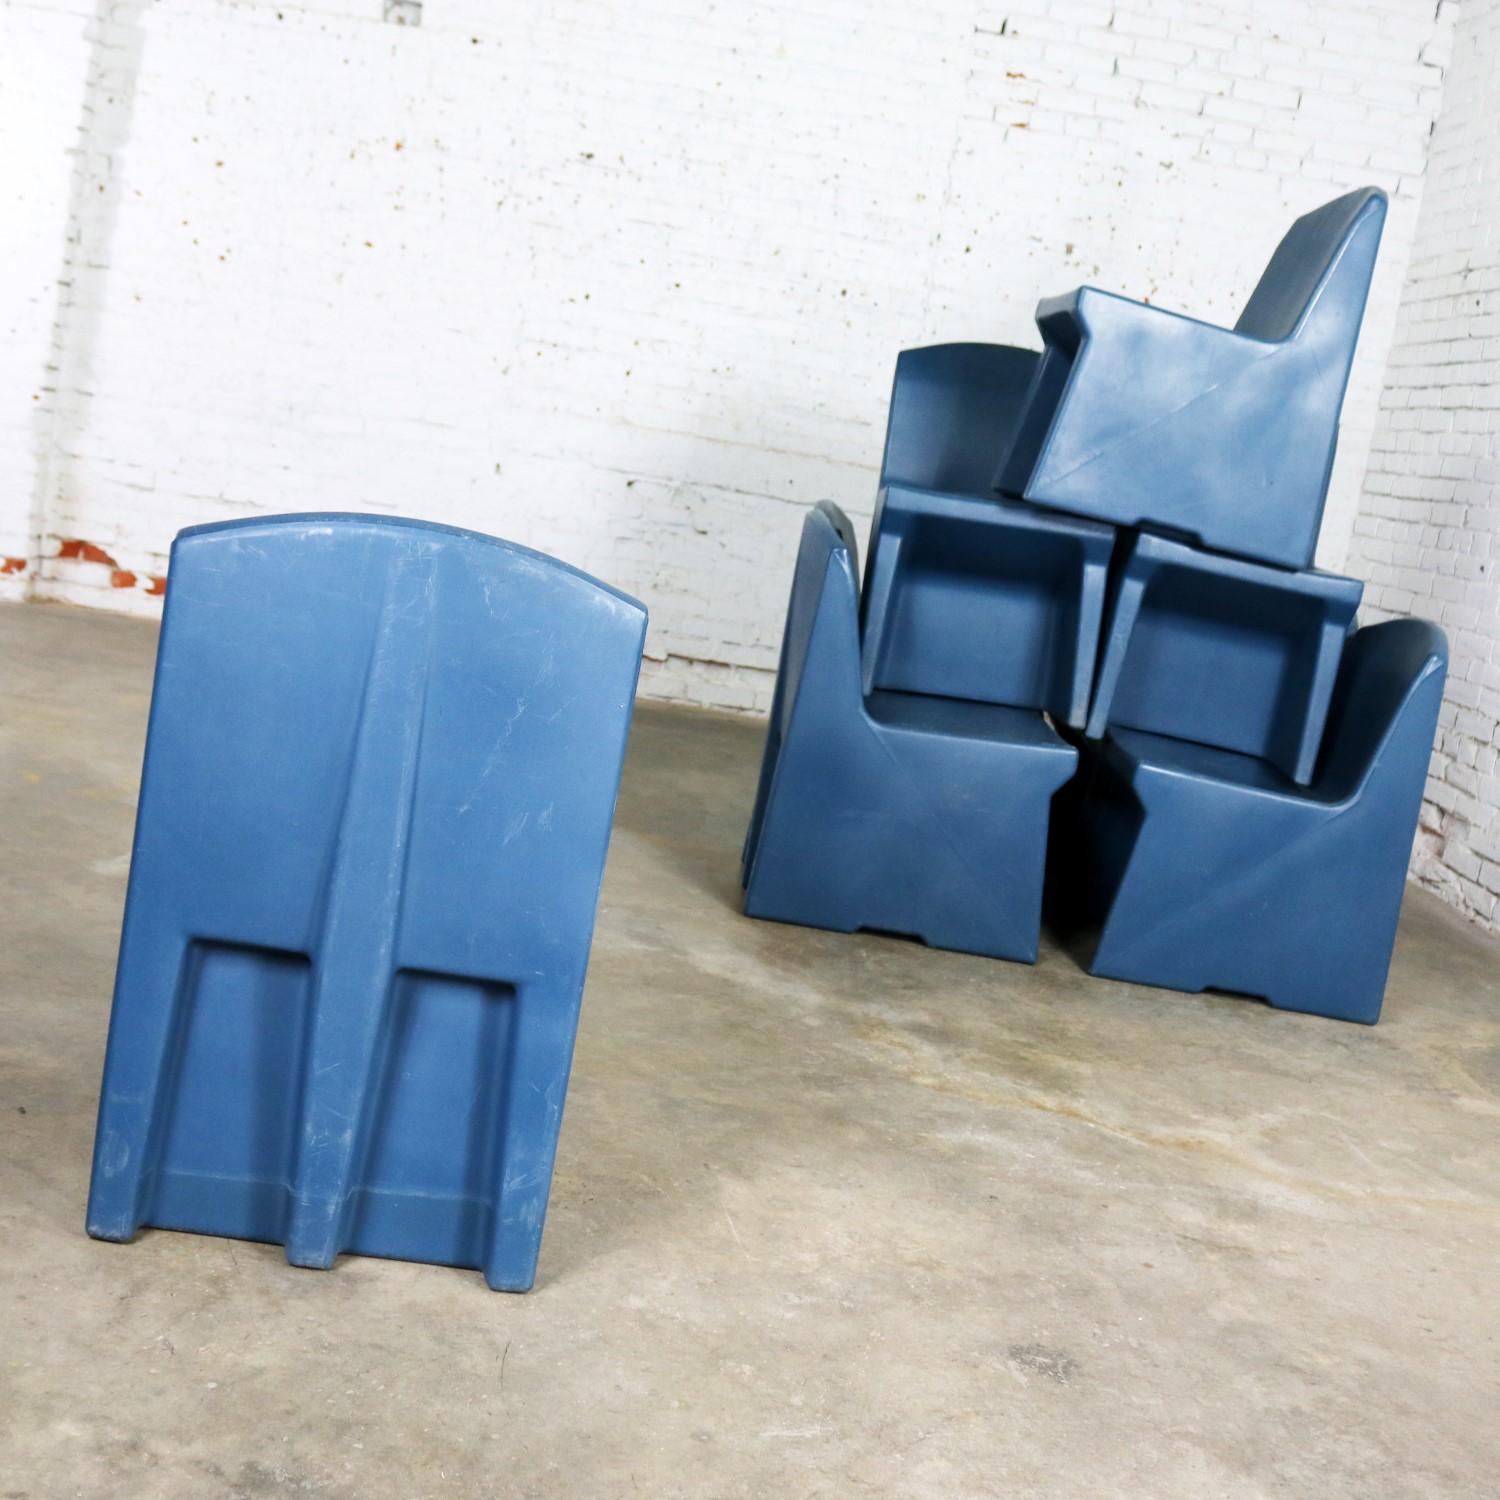 American Blue Molded Plastic Side or Slipper Chairs by Norix Set of Eight